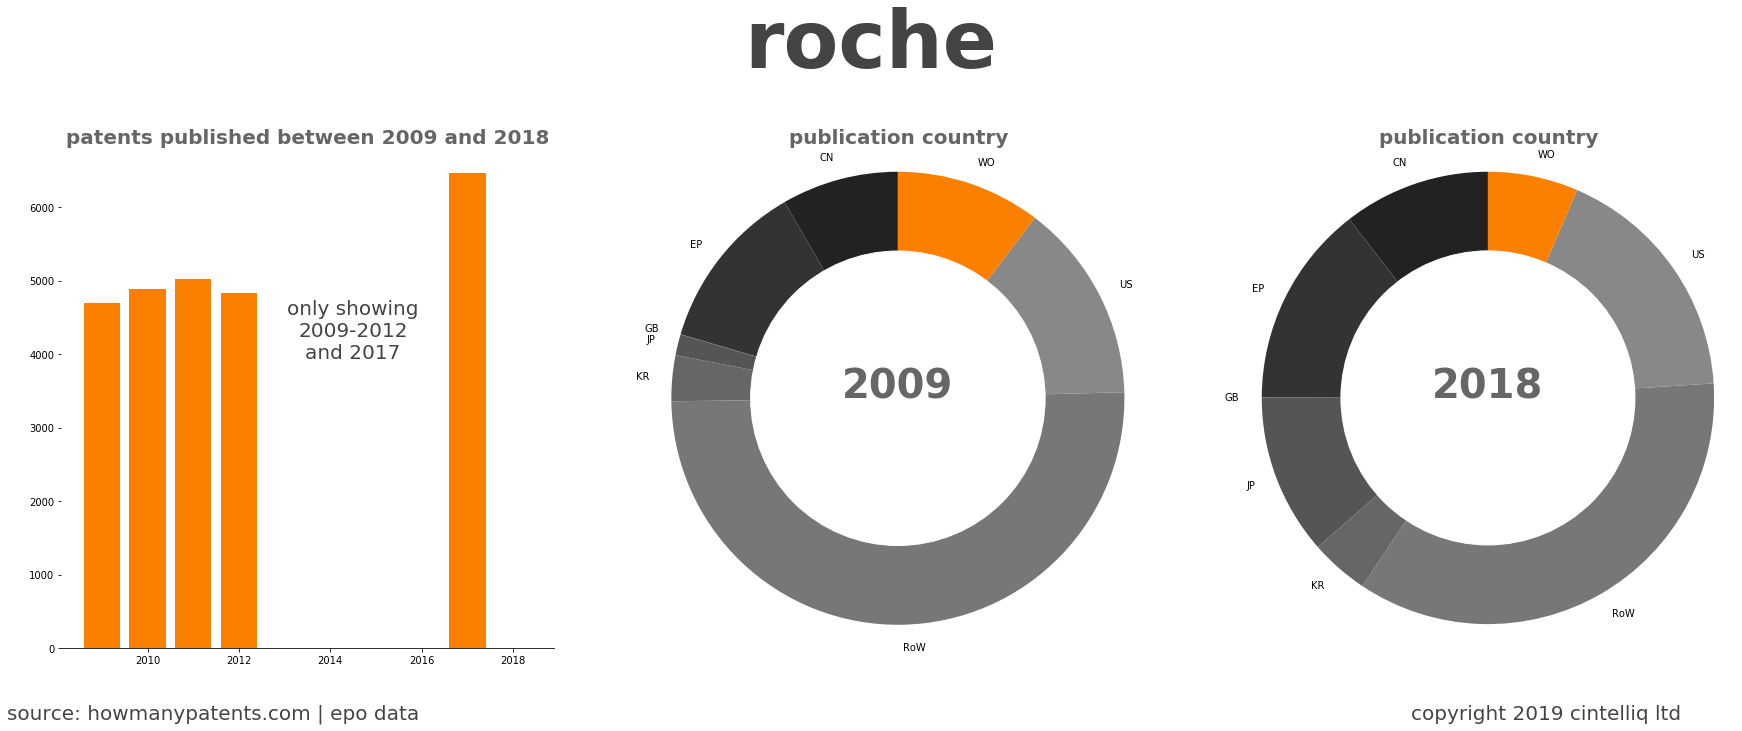 summary of patents for Roche